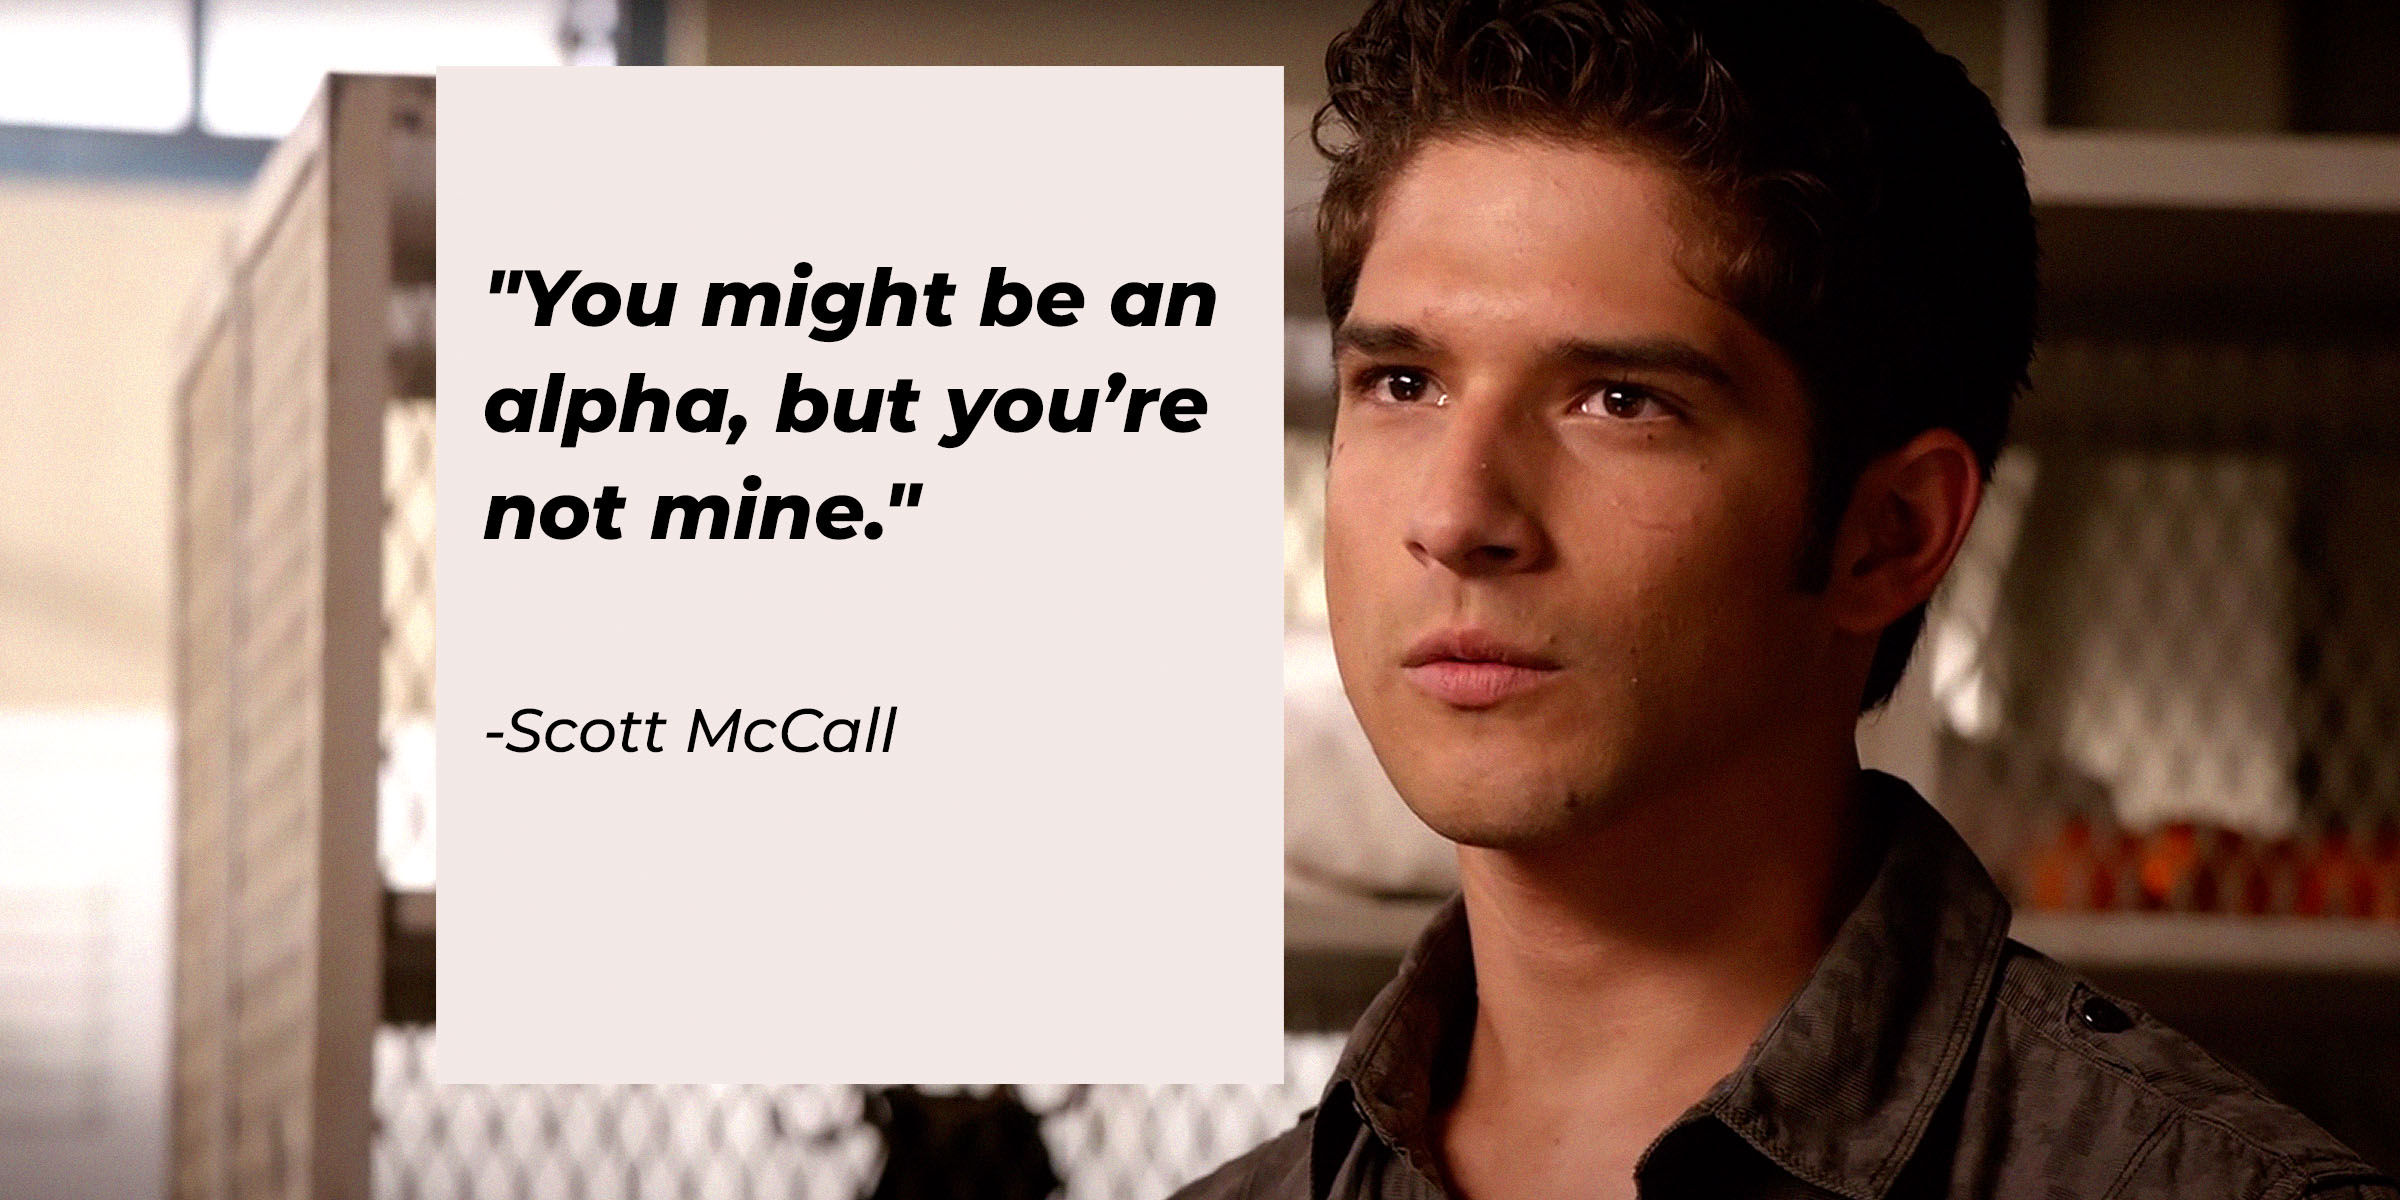 Scott McCall's quote: "You might be an alpha, but you're not mine" | Source: Youtube.com/WolfWatch